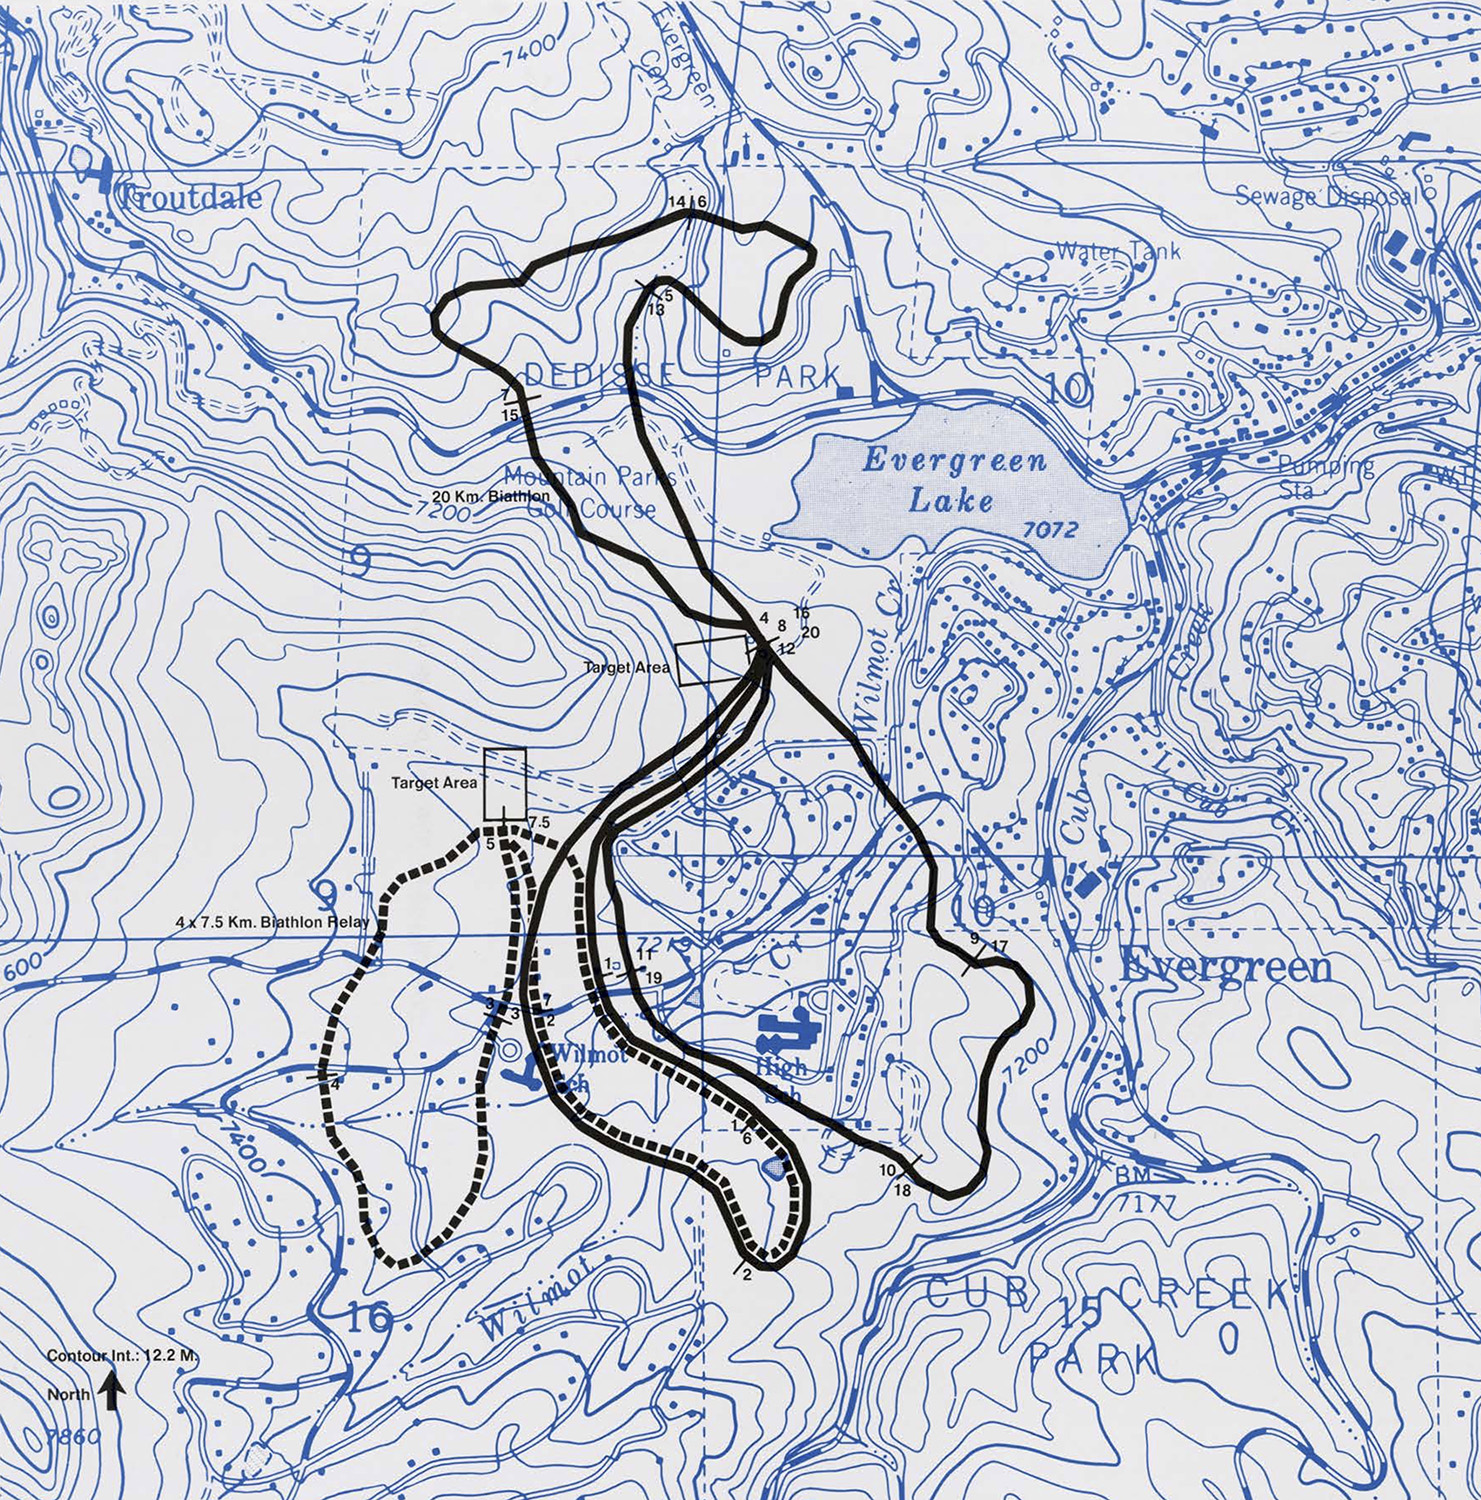 Nordic skiing trail map in Evergreen, Colorado